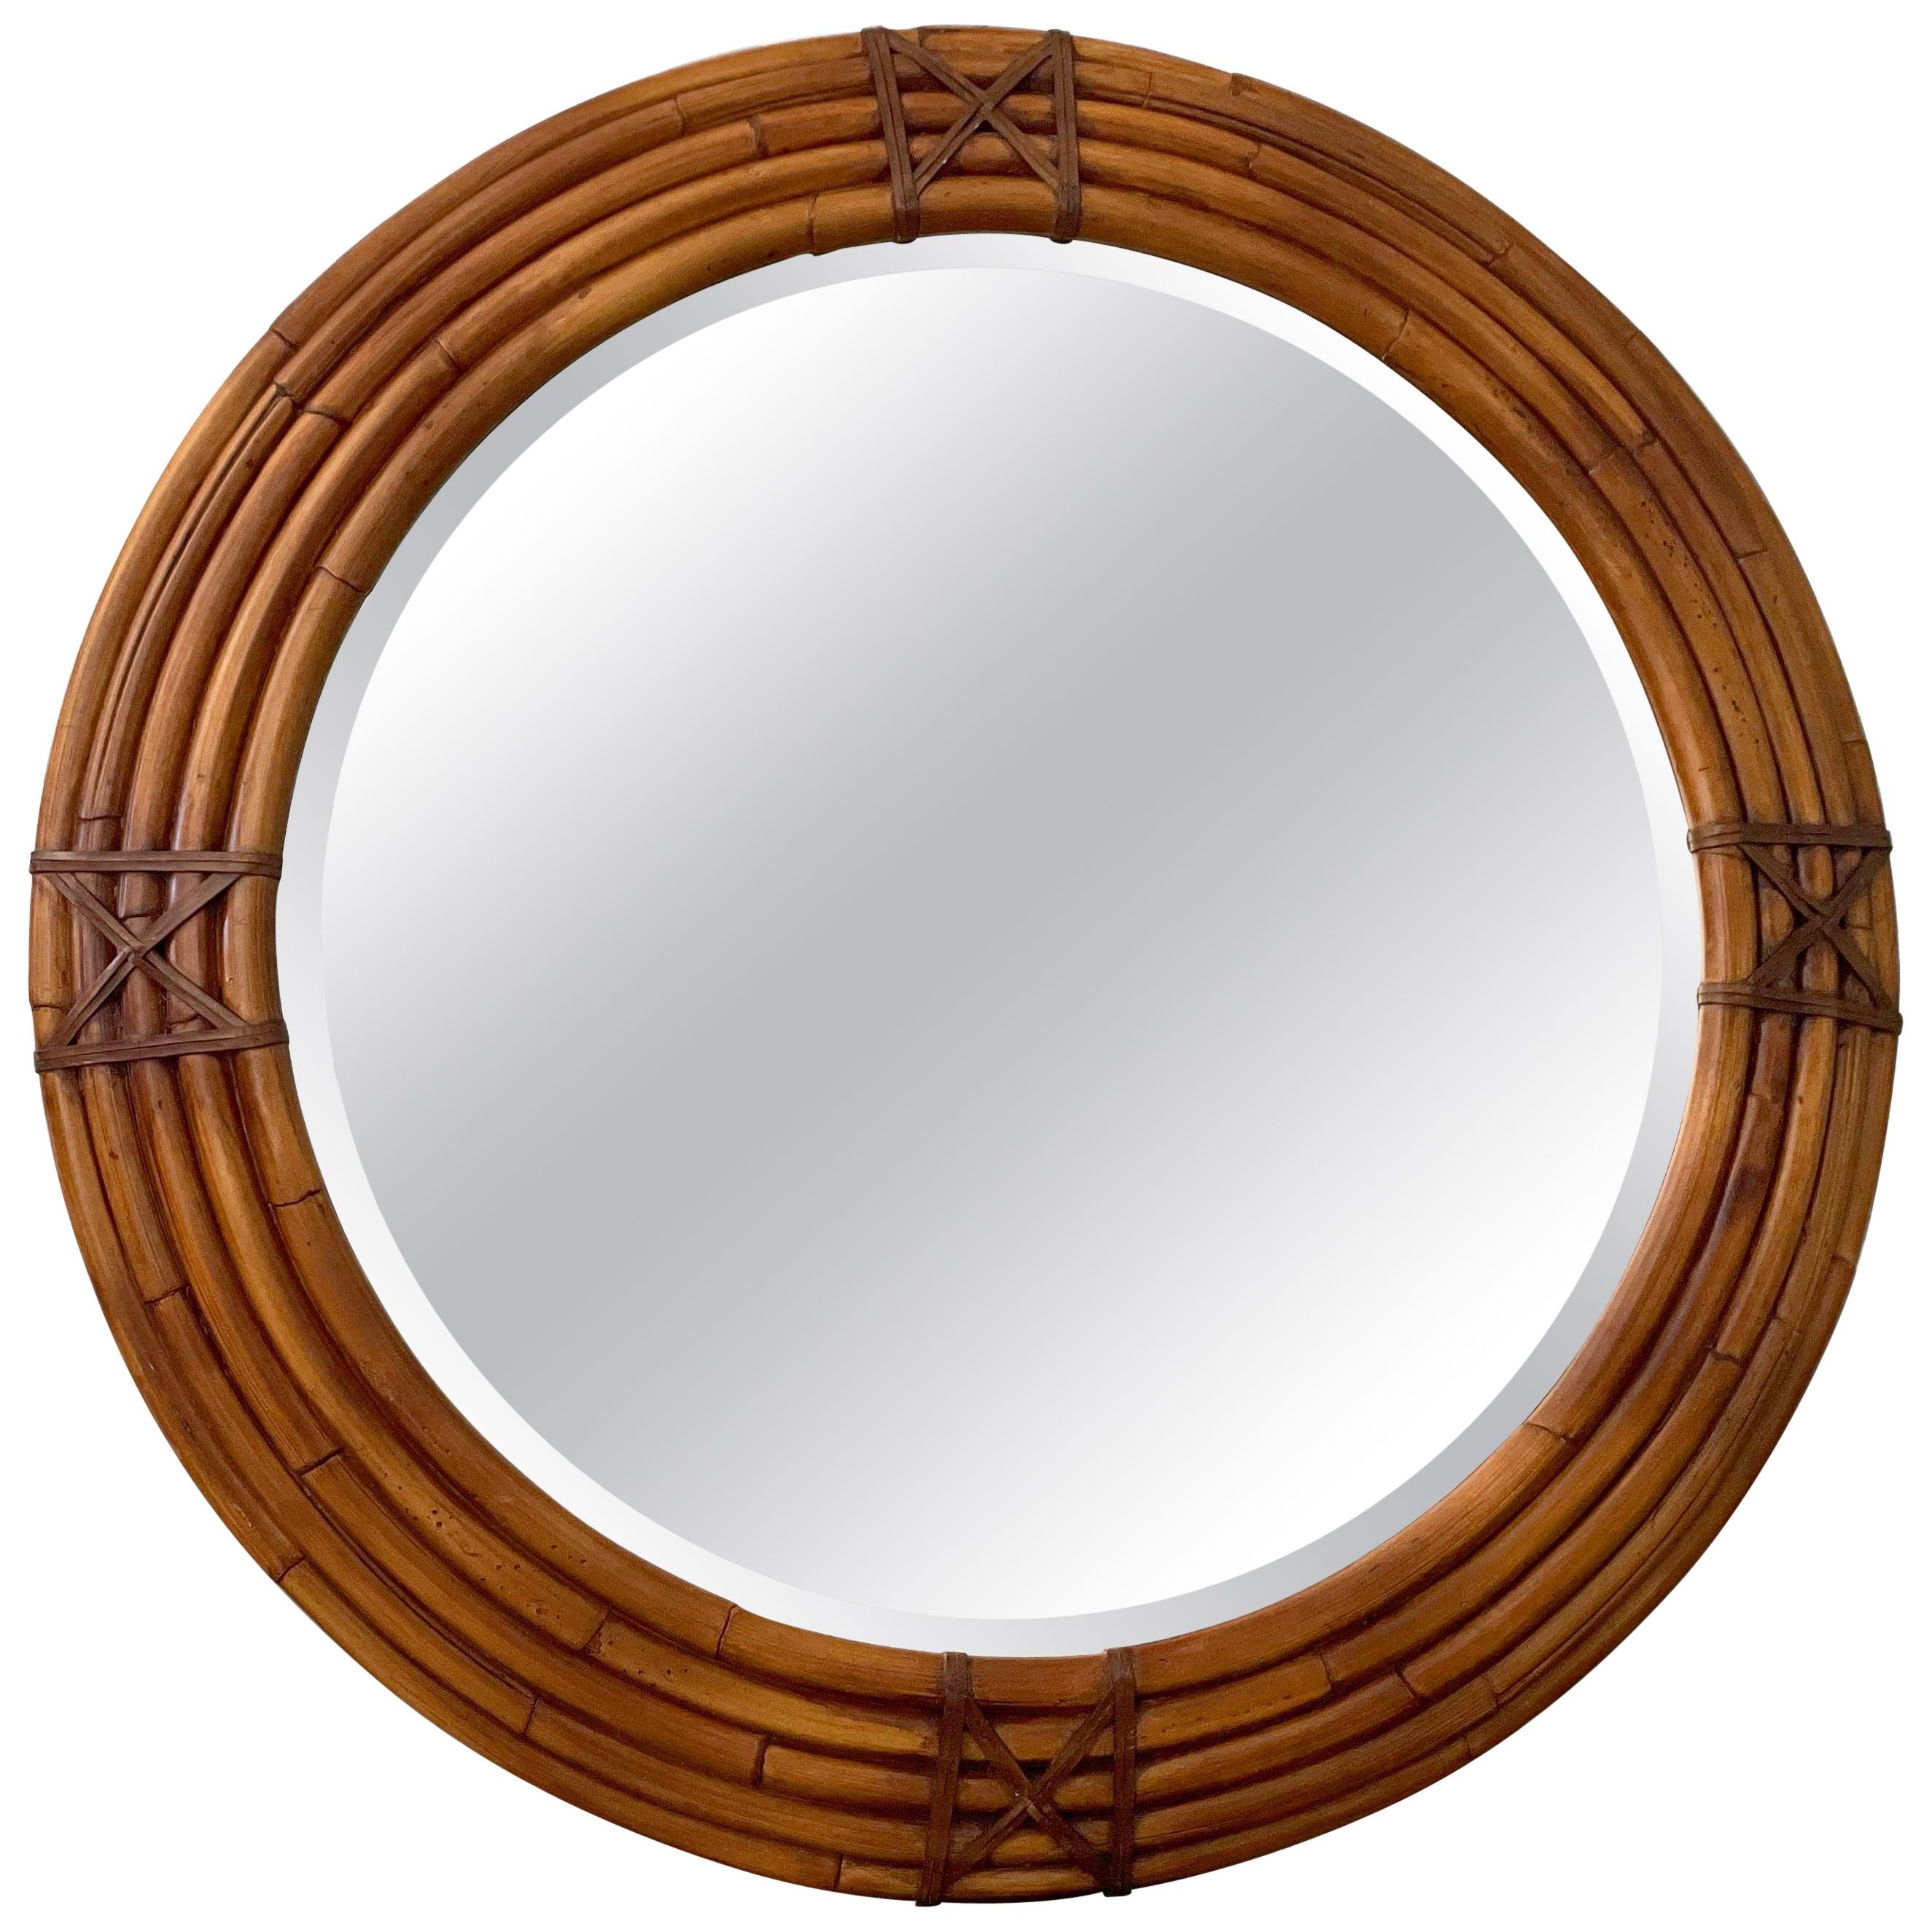 Large Round Midcentury Mirror by Milling Road for Baker in Rattan and Leather